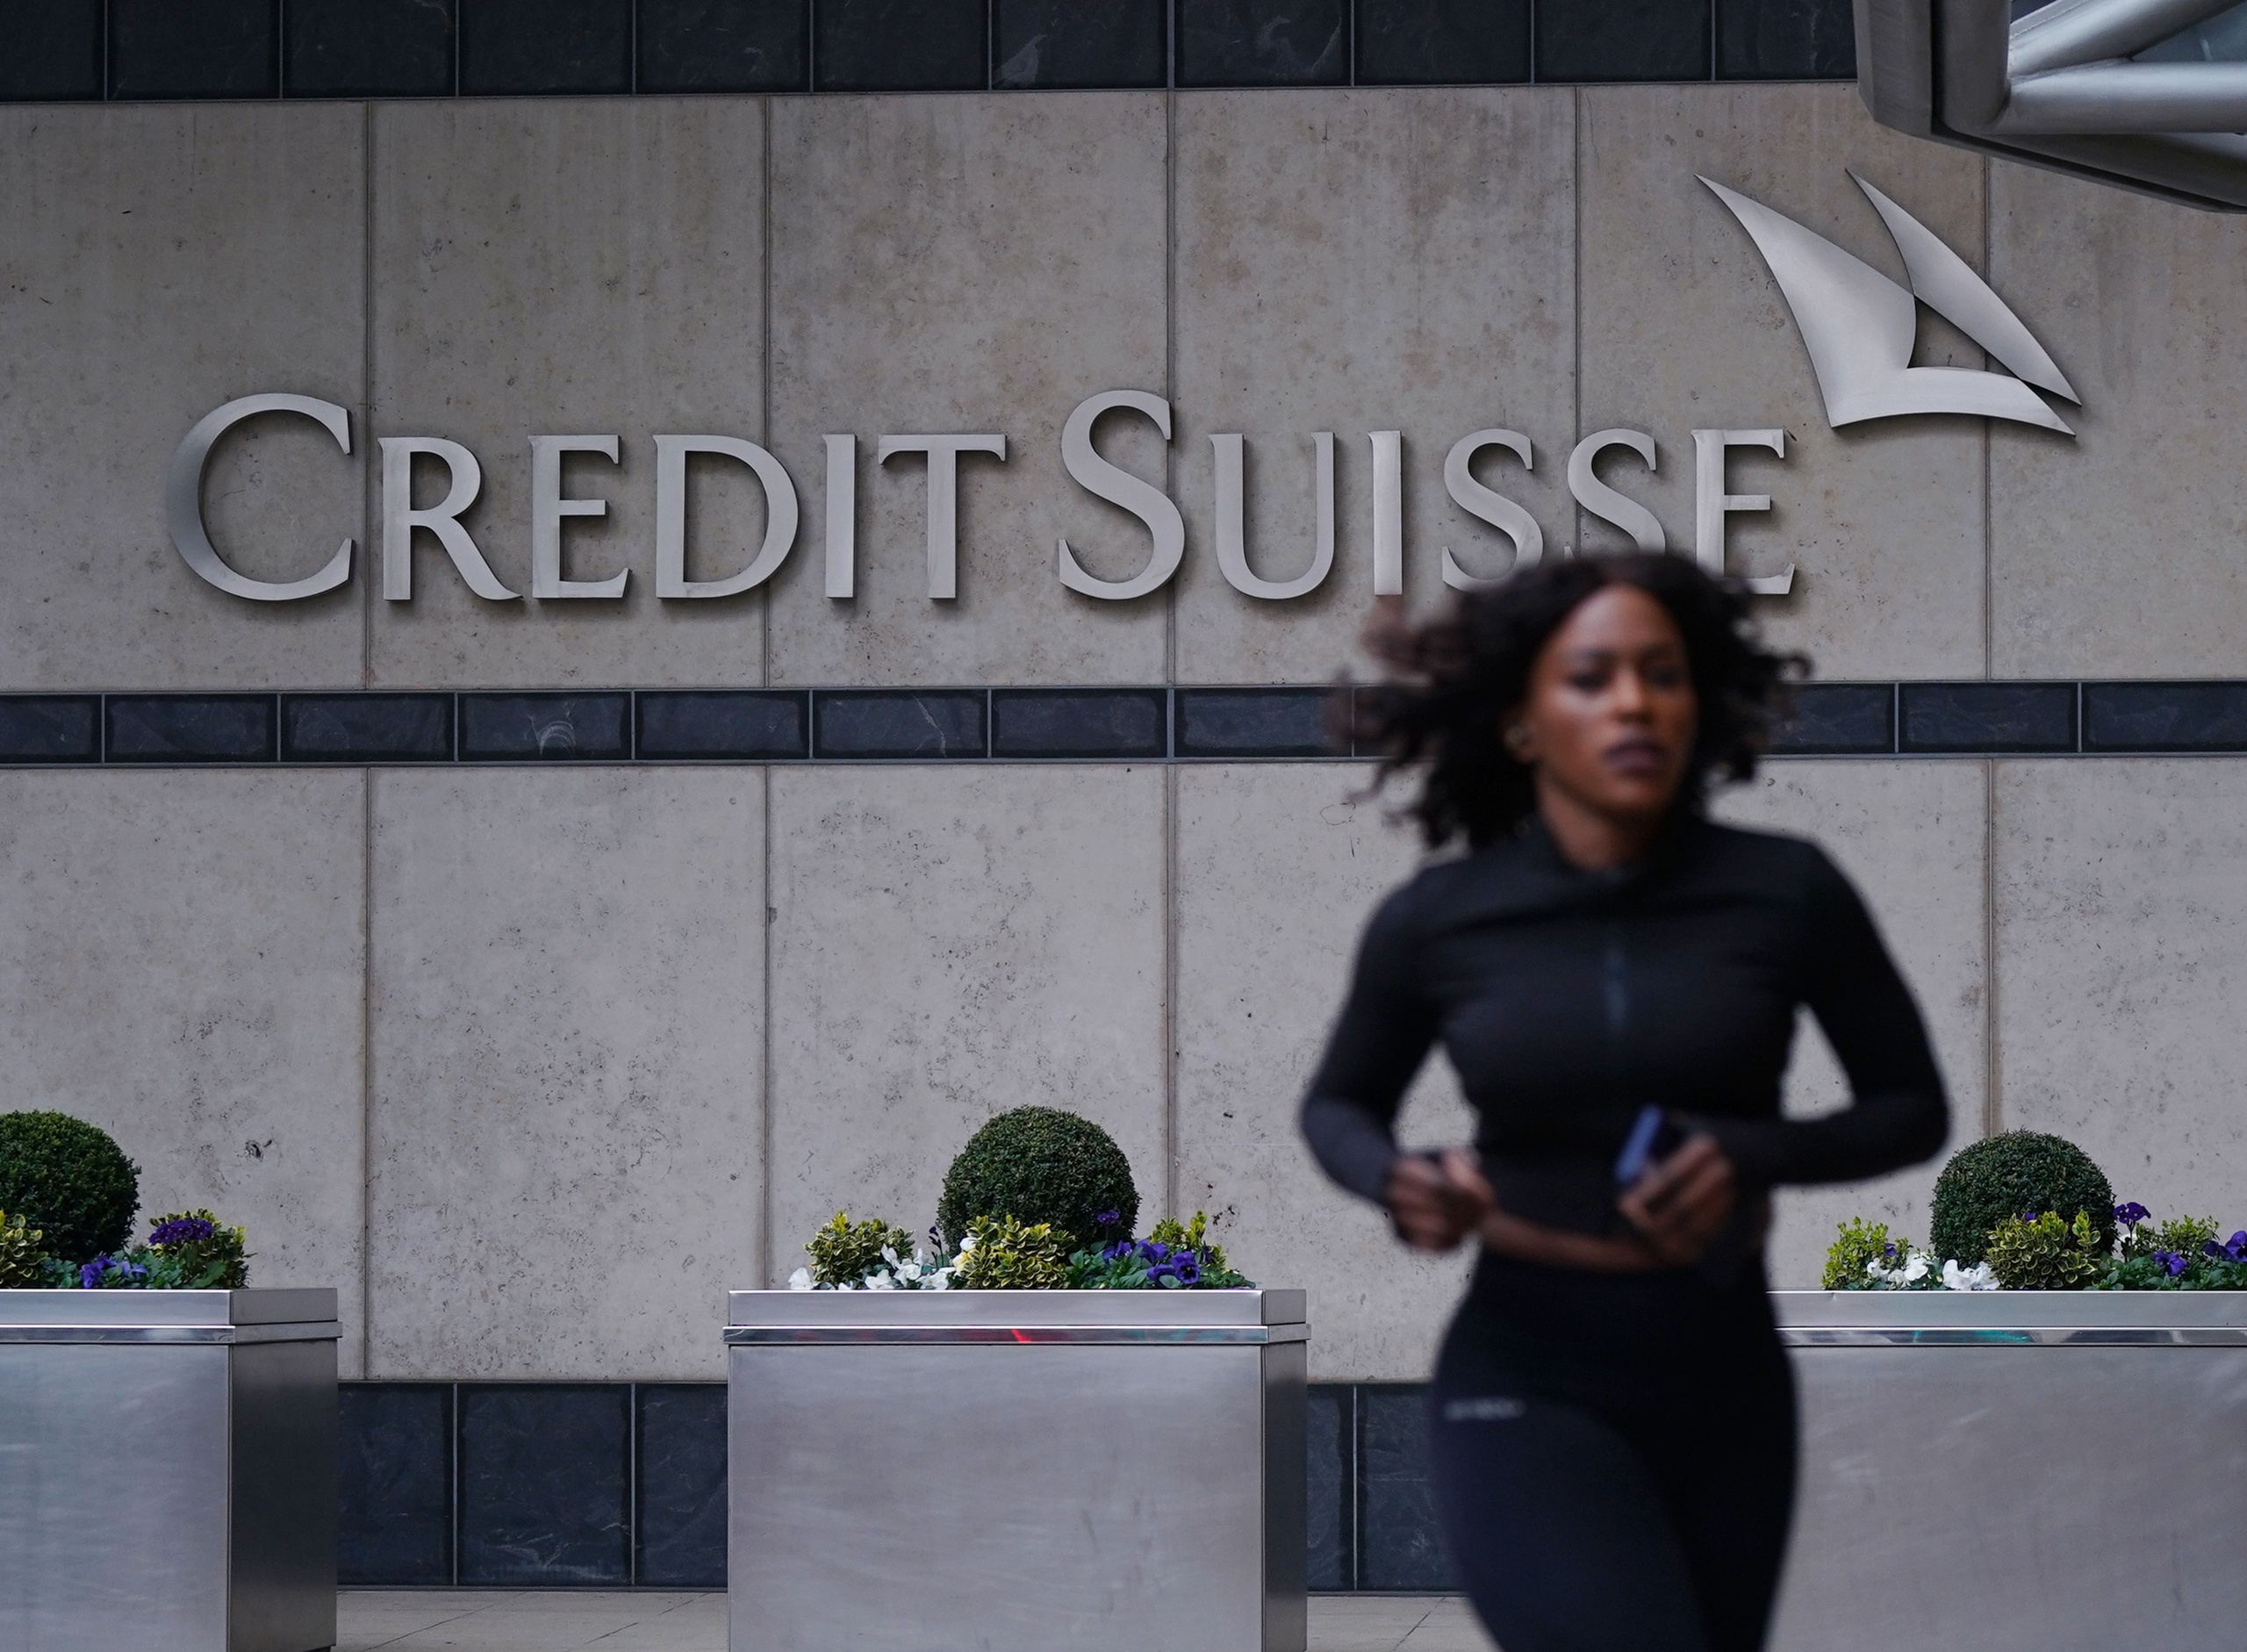 Swiss bank UBS has acquired its troubled peer Credit Suisse for $3 billion.  The Swiss central bank guarantees a loan of up to 100 billion Swiss francs